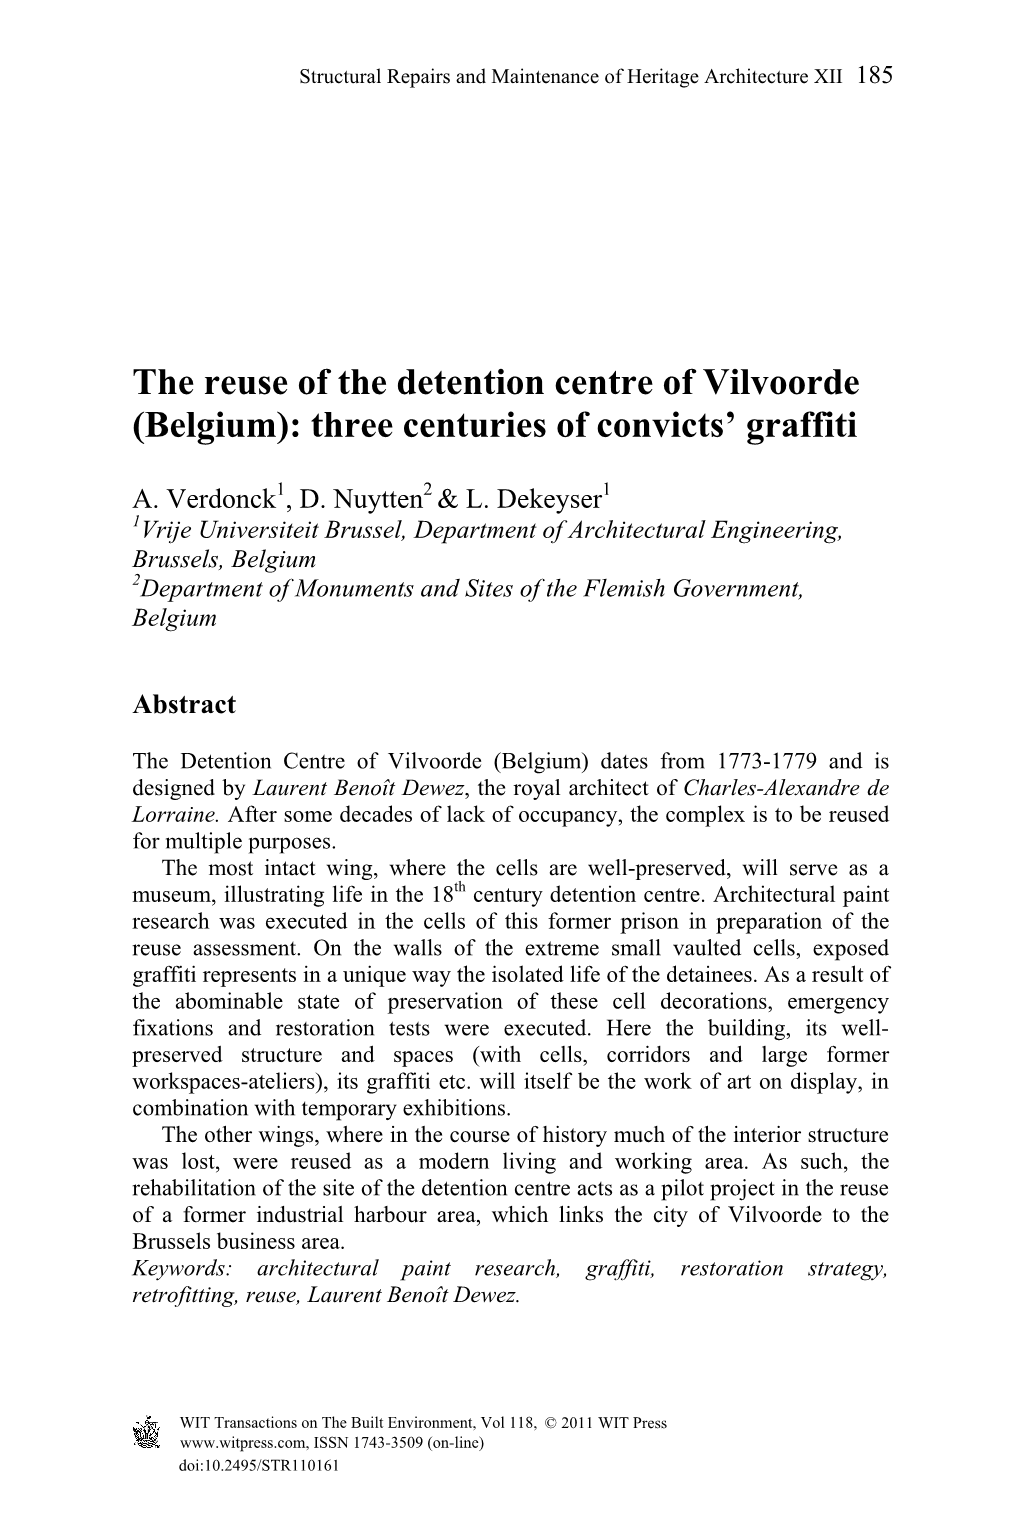 The Reuse of the Detention Centre of Vilvoorde (Belgium): Three Centuries of Convicts’ Graffiti